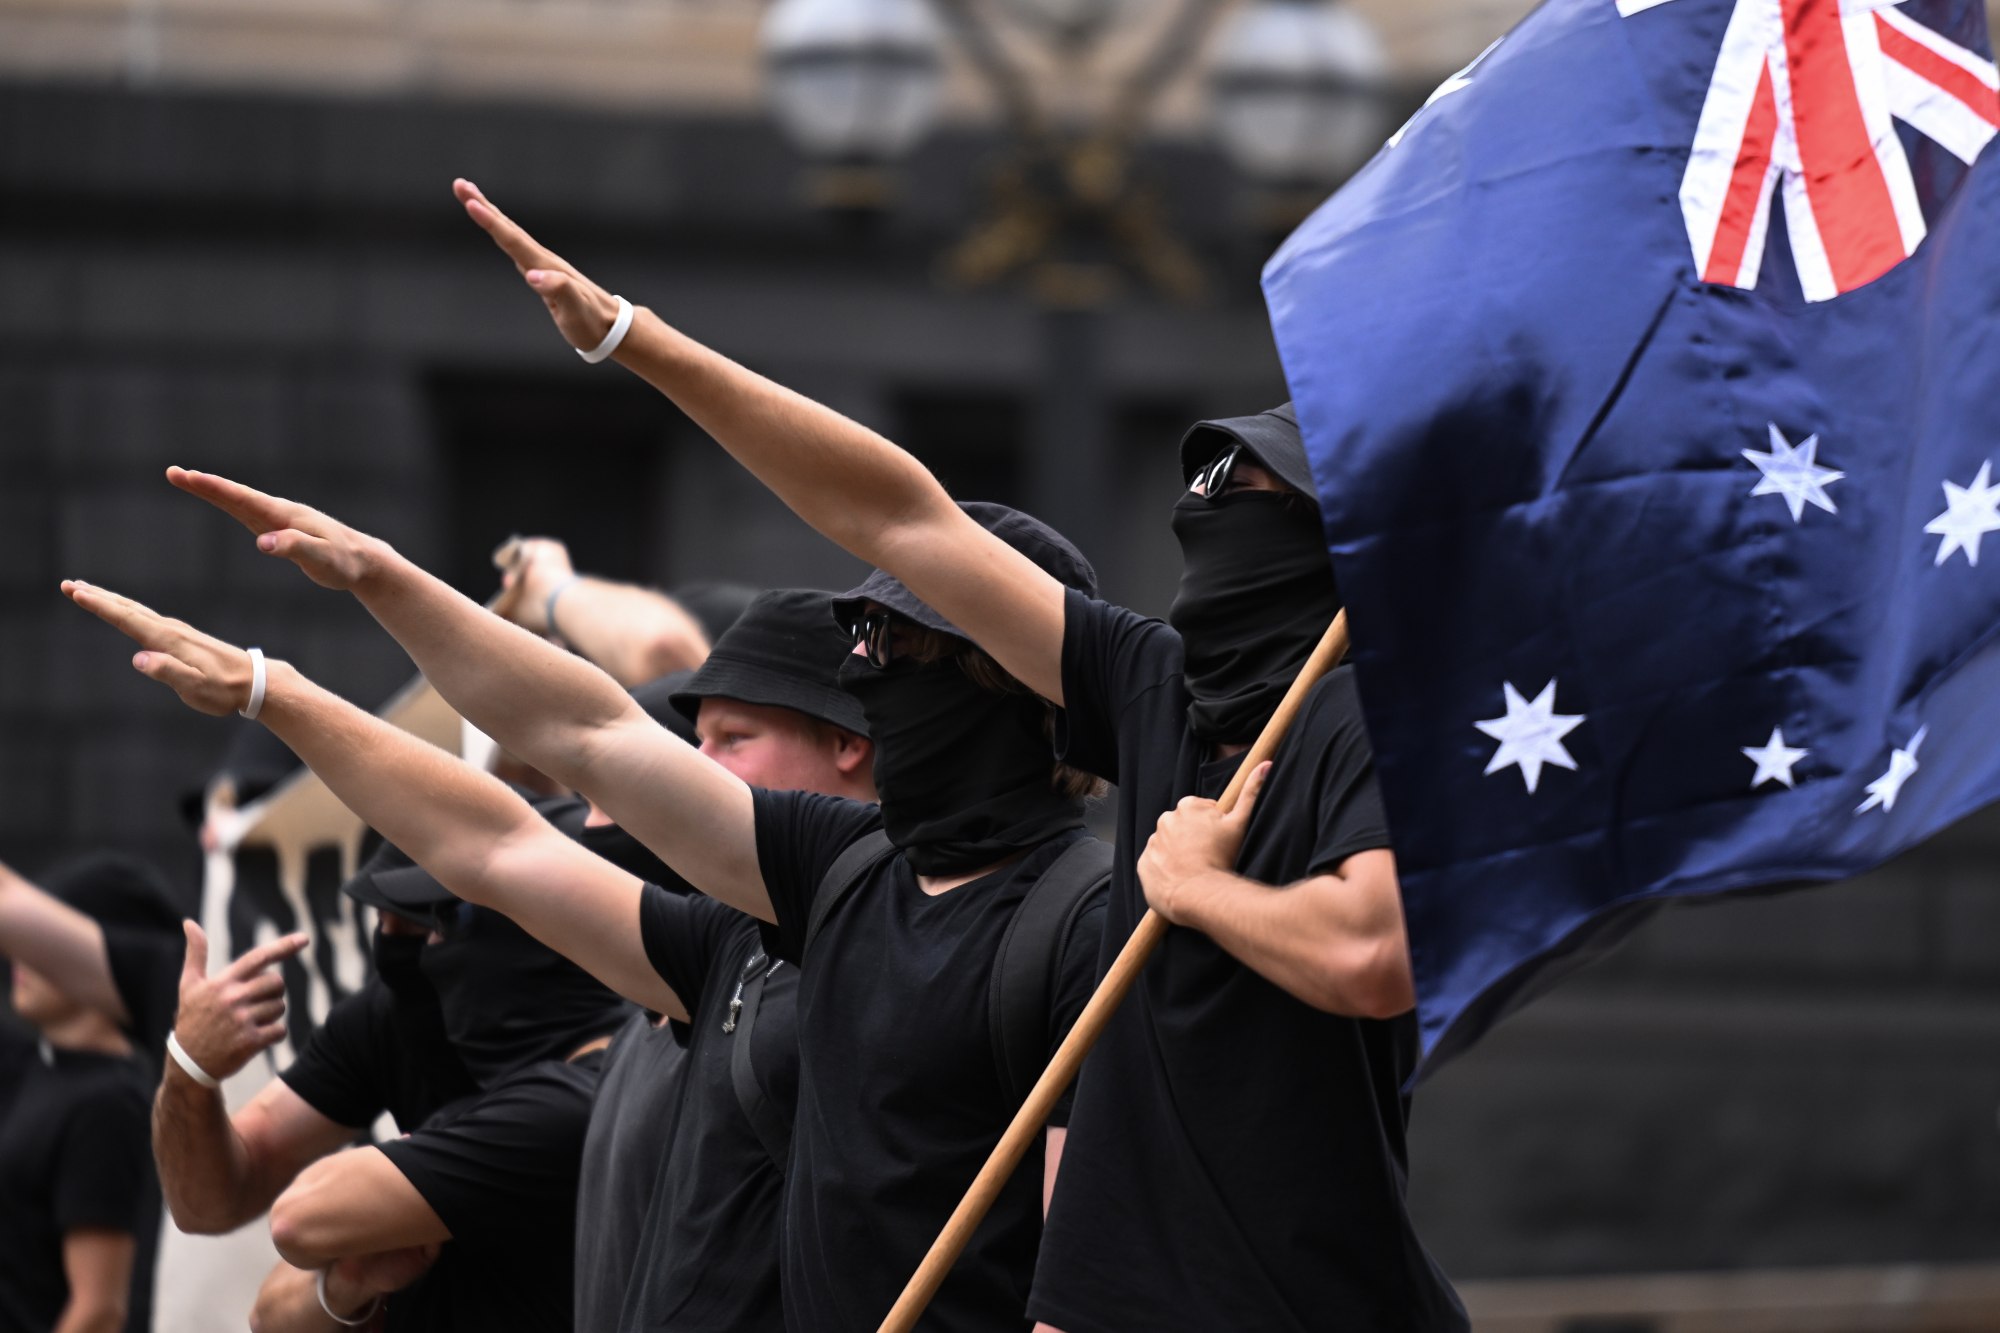 Neo-Nazis holding the Australian flag pictured at a protest in Melbourne on March 18. Photo: EPA-EFE